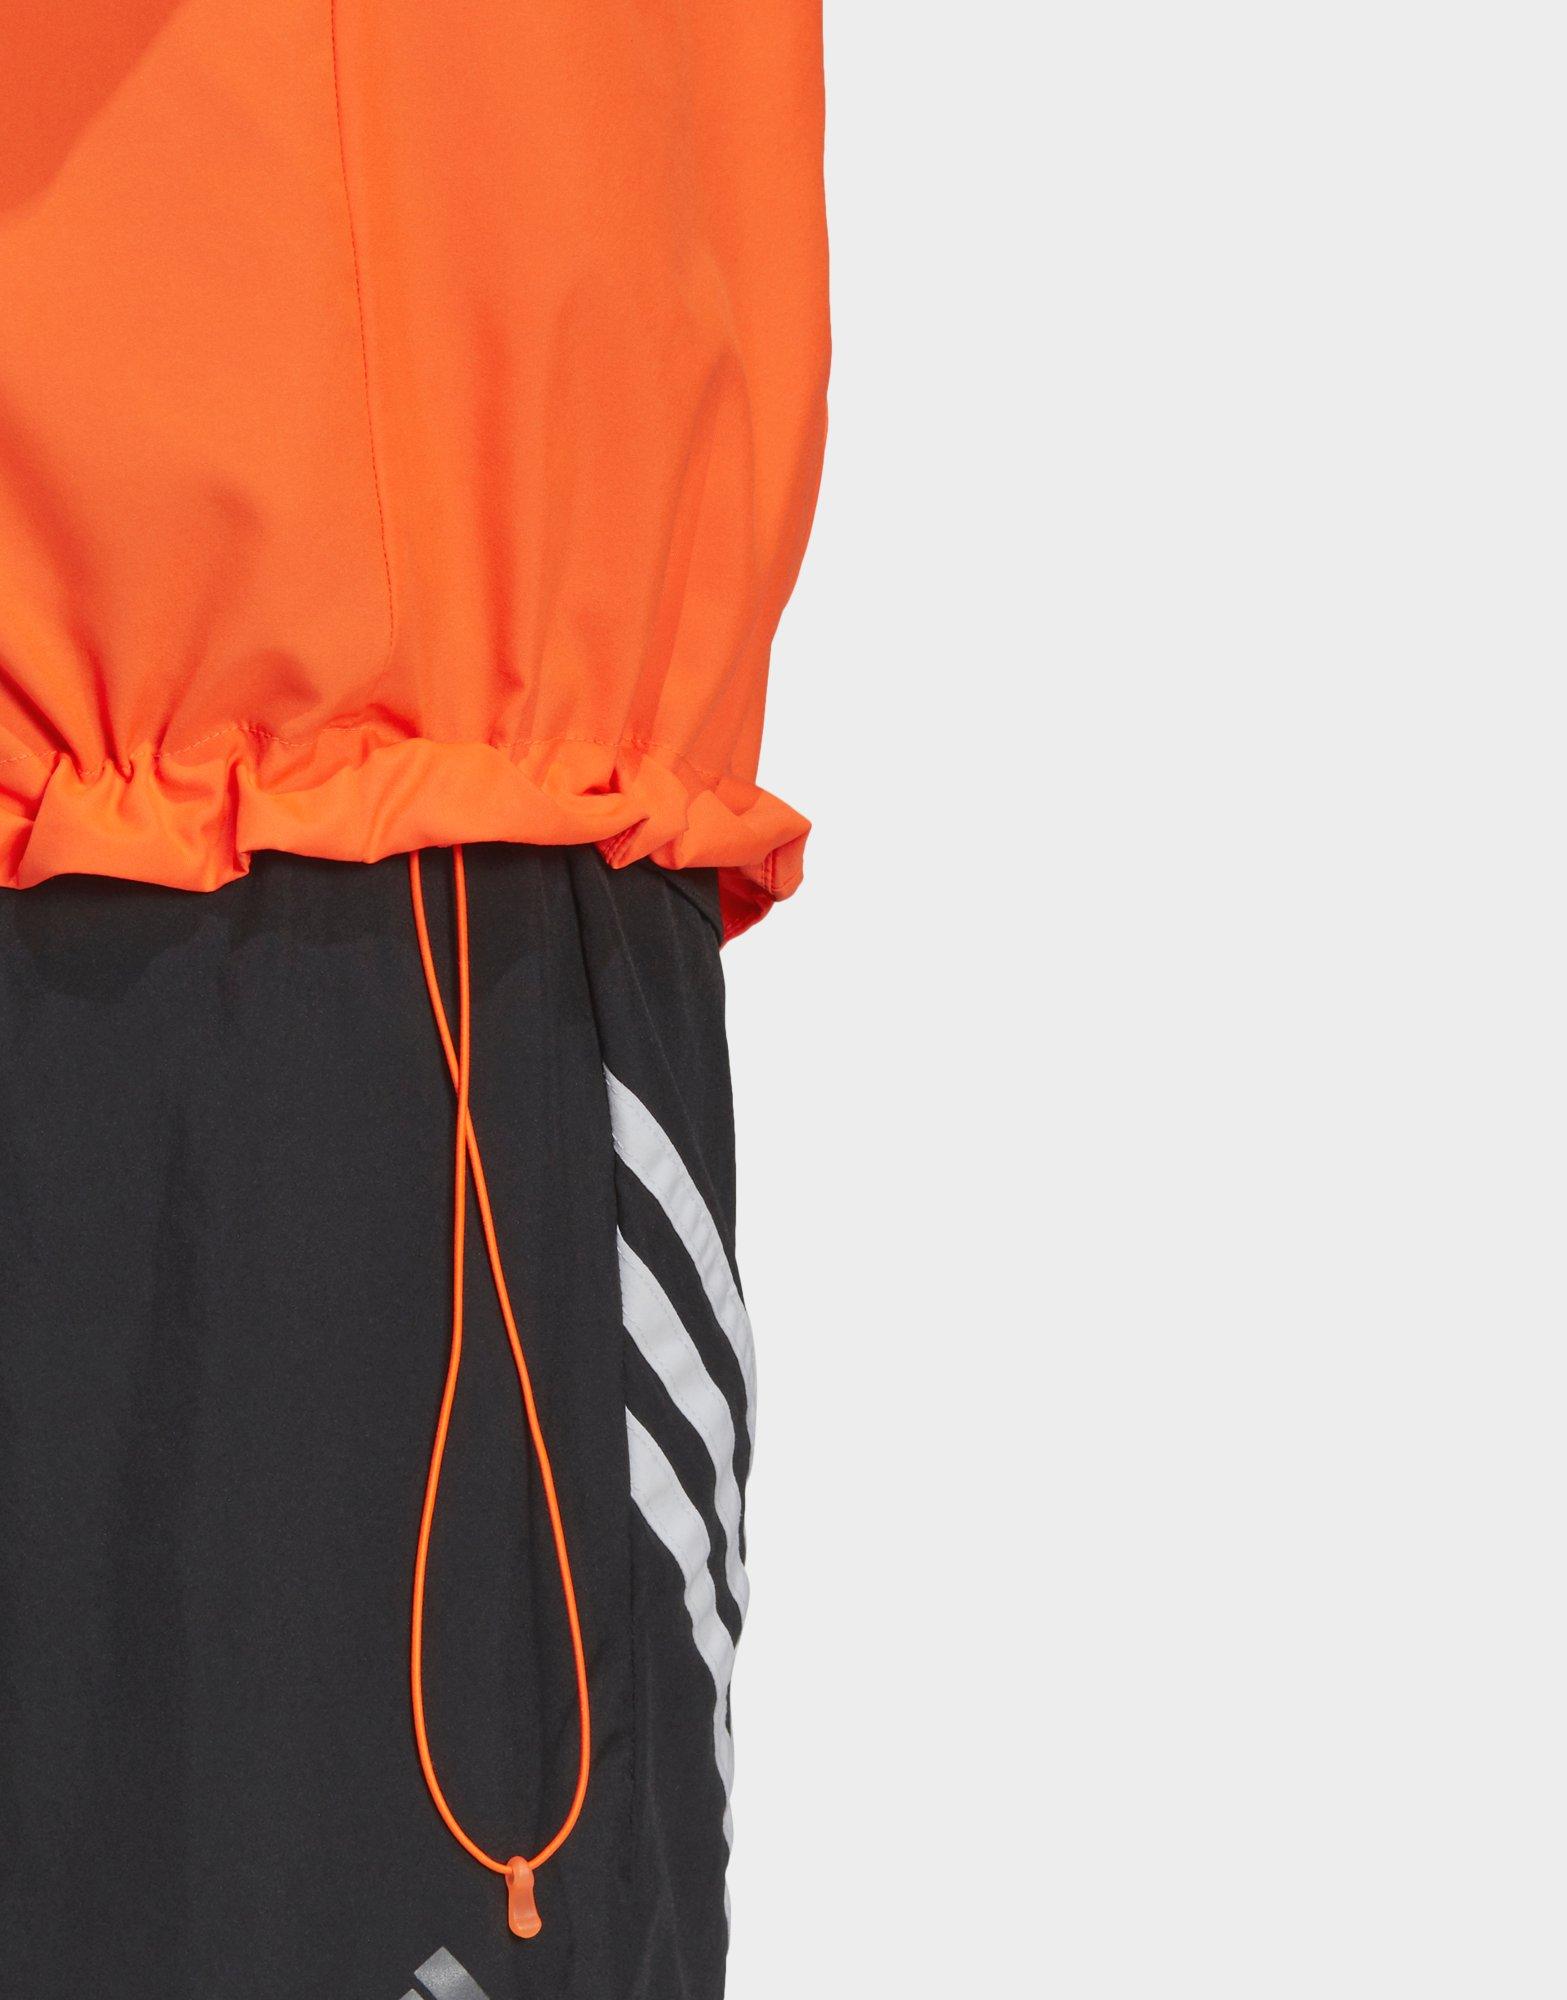 own the run reflective jacket